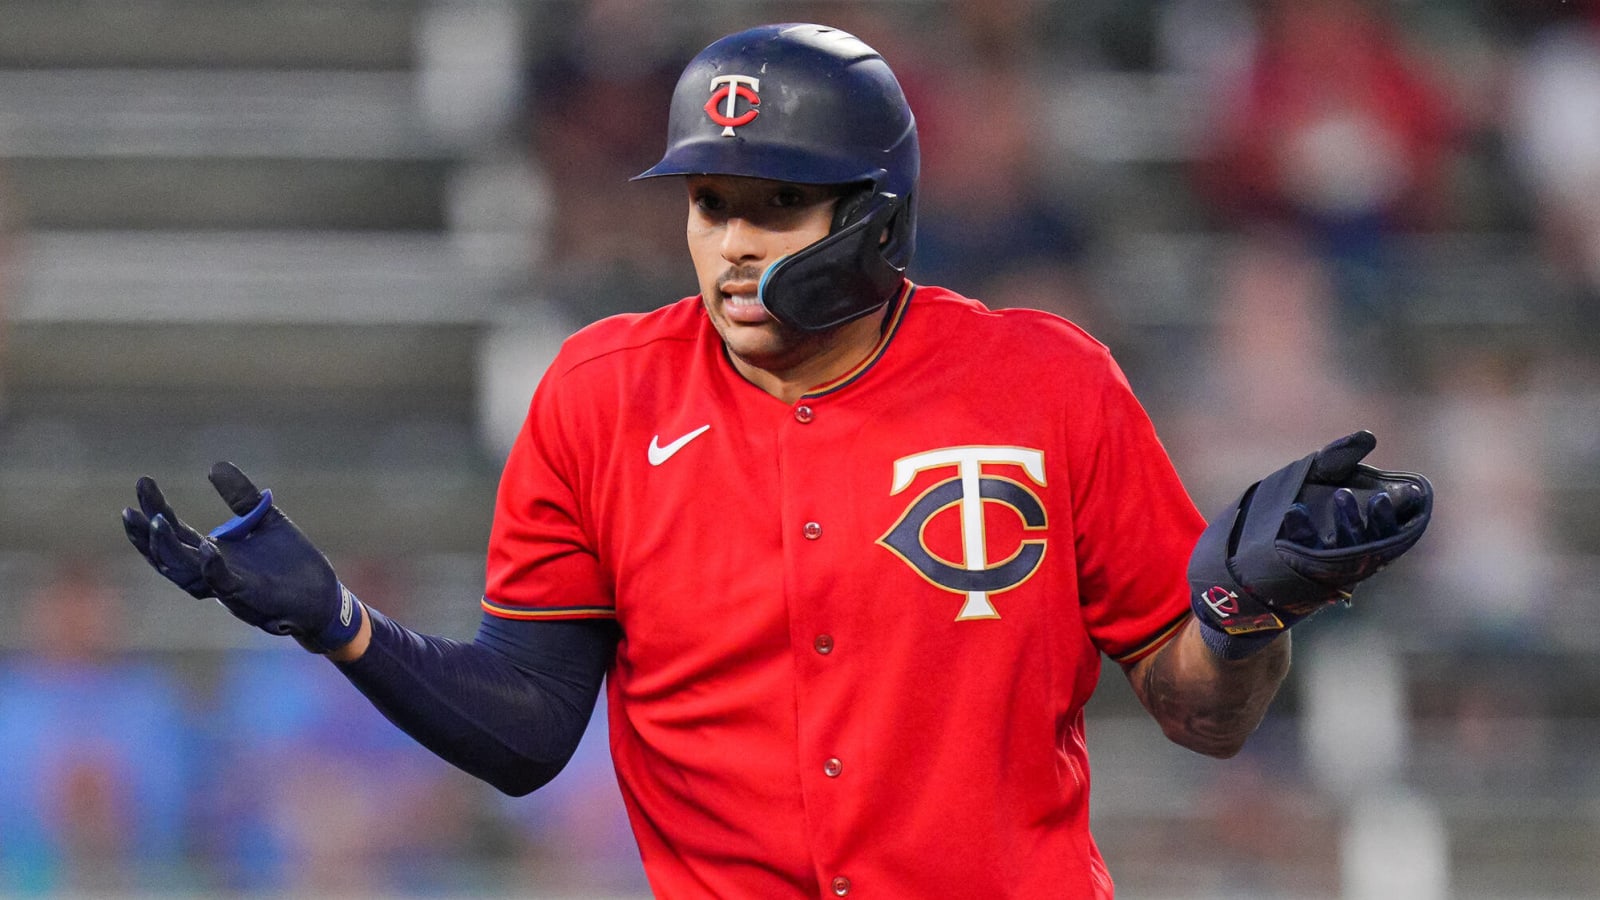 Correa free-agency saga ends with surprise return to Twins